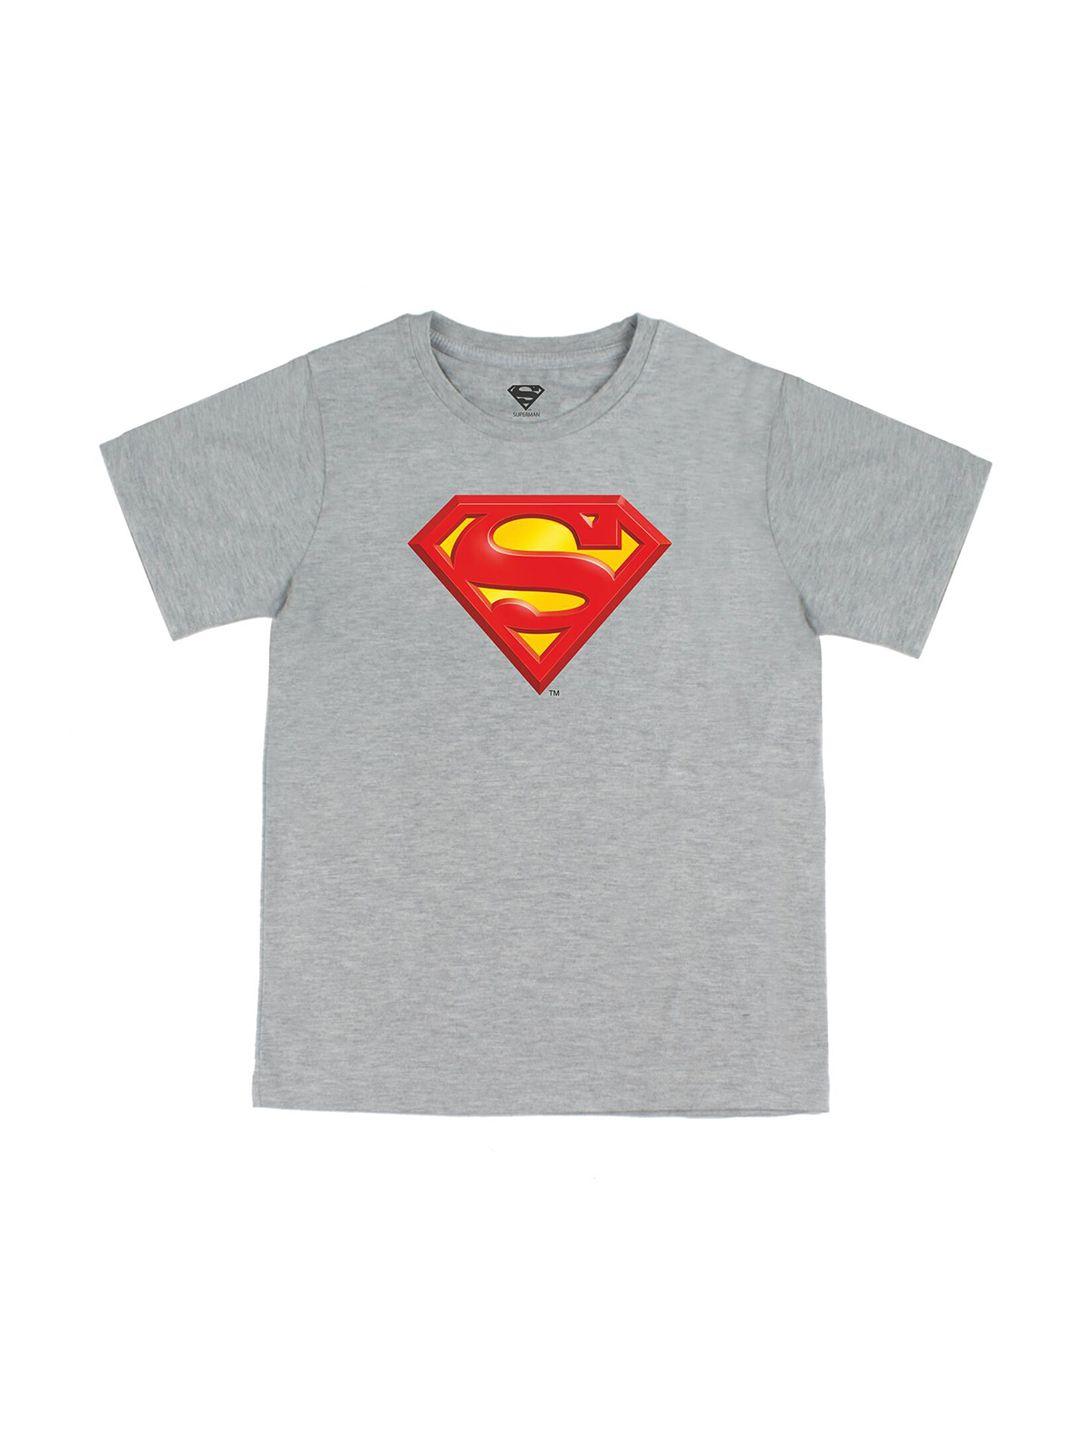 dc-by-wear-your-mind-boys-grey-superman-printed-applique-t-shirt